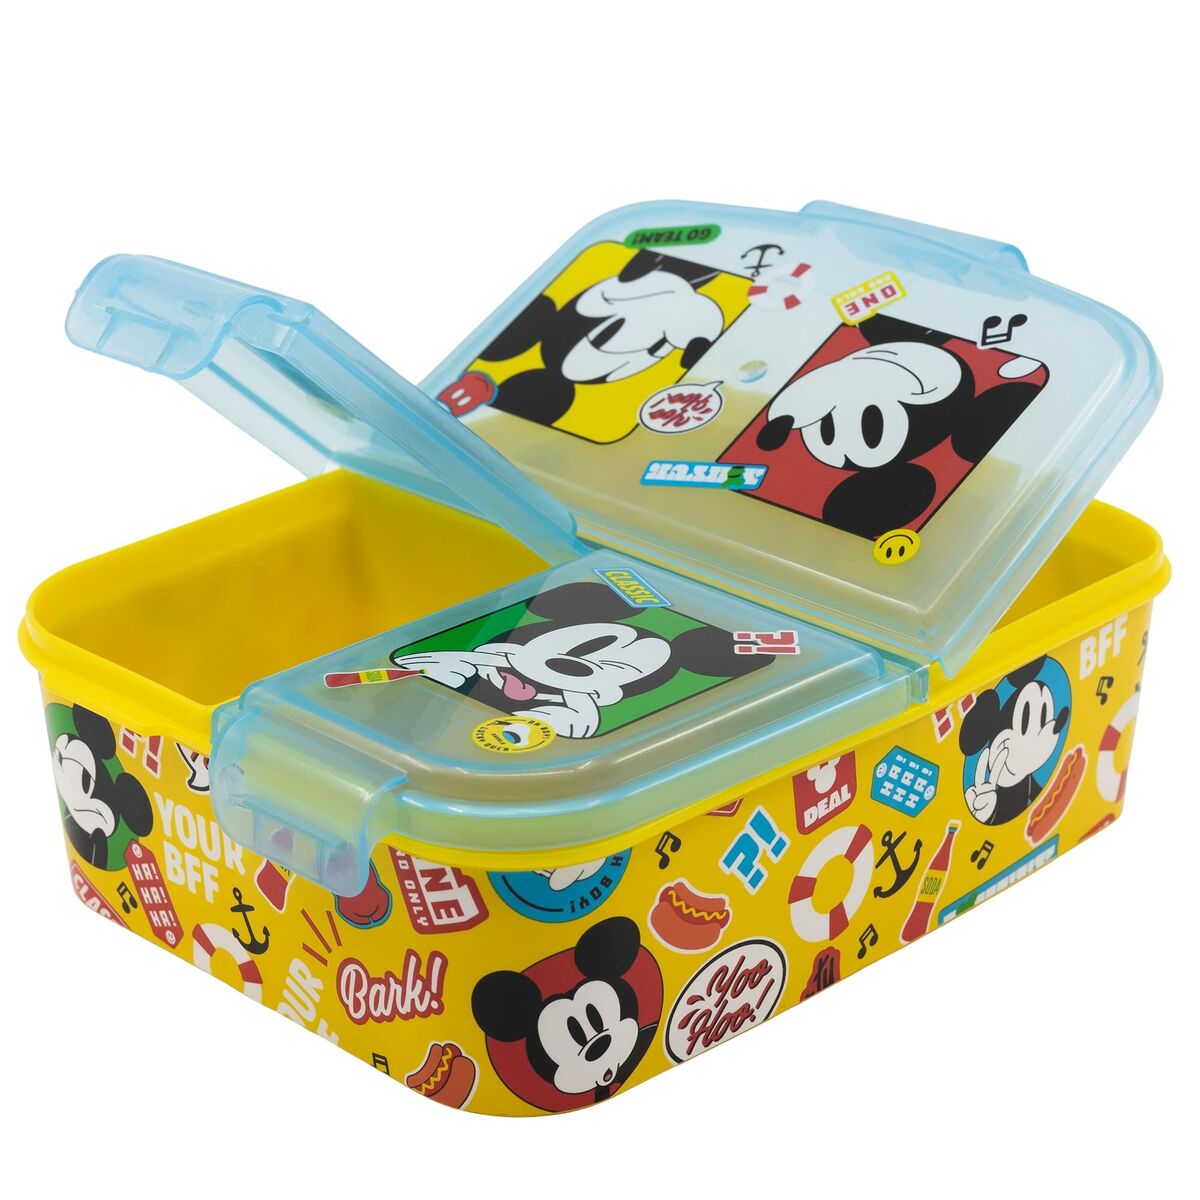 Compartment Lunchbox Mickey Mouse Fun-Tastic 19,5 x 16,5 x 6,7 cm polypropylene